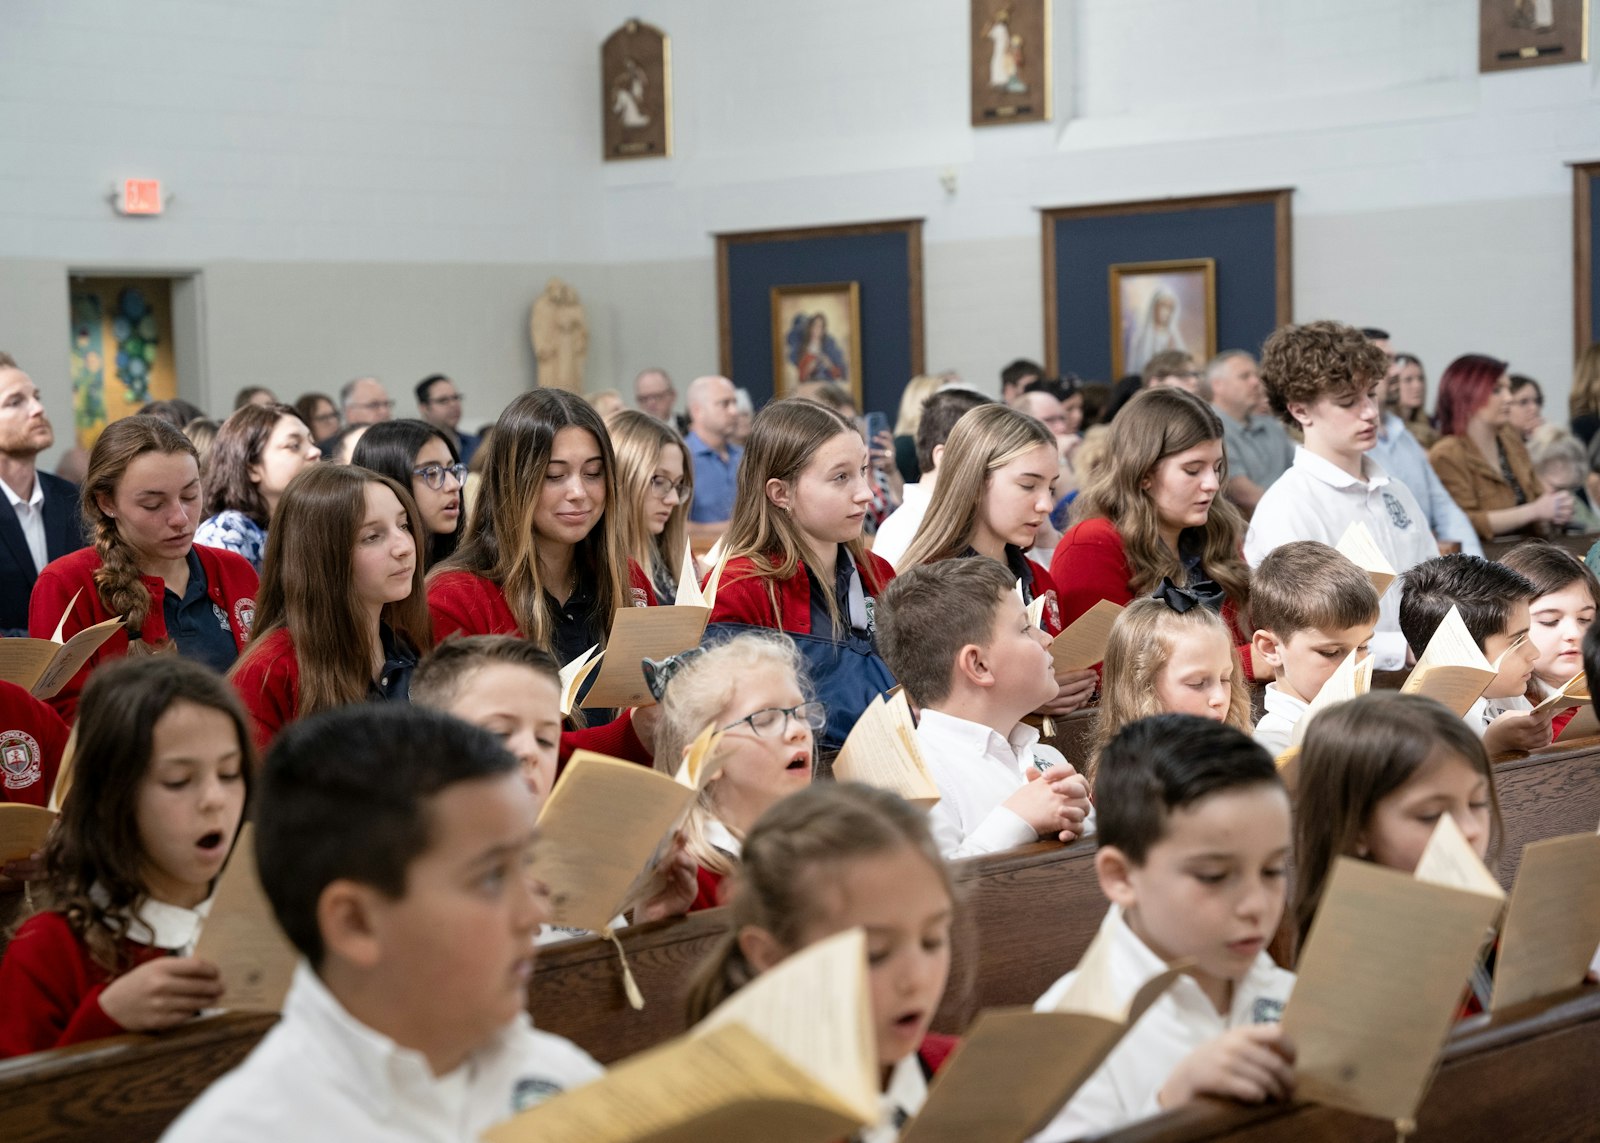 Students from St. Mary School sing during the dedication Mass for the school's new chapel on April 16.